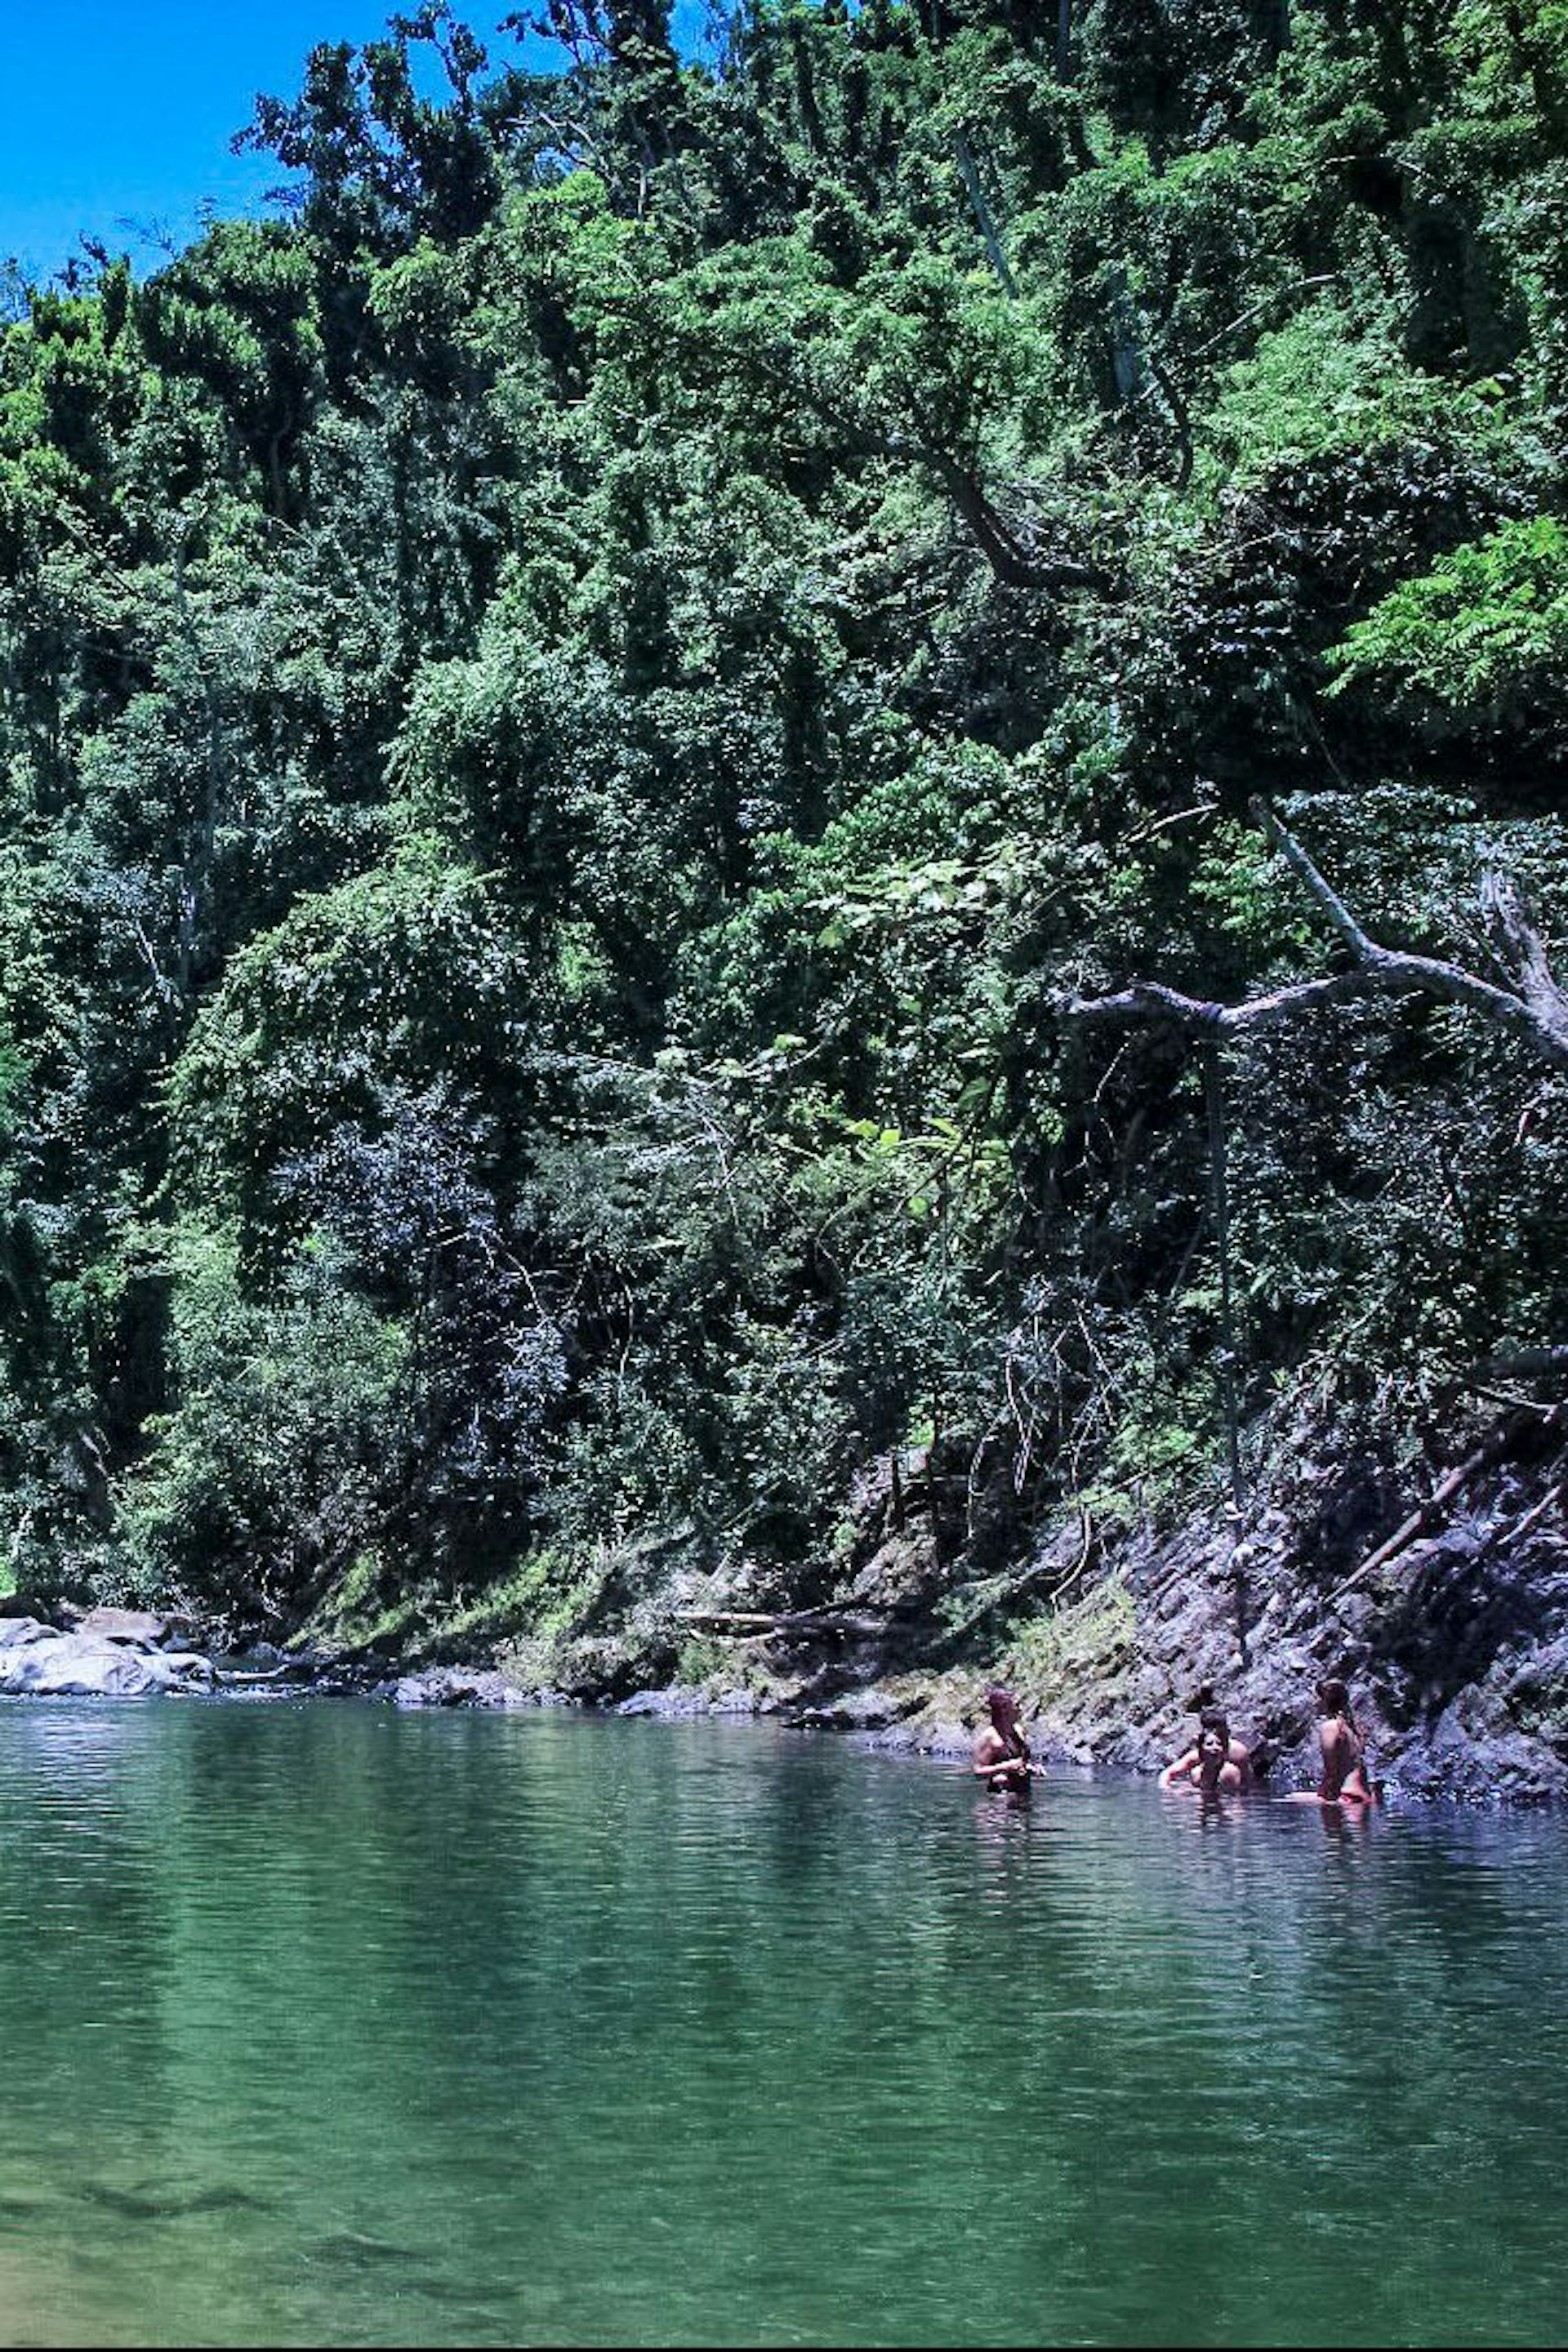 Swimmers cool off in Las Damas pool at the end of the Angelito trail in El Yunque Rainforest Mikol Hoffman / Lonely Planet 